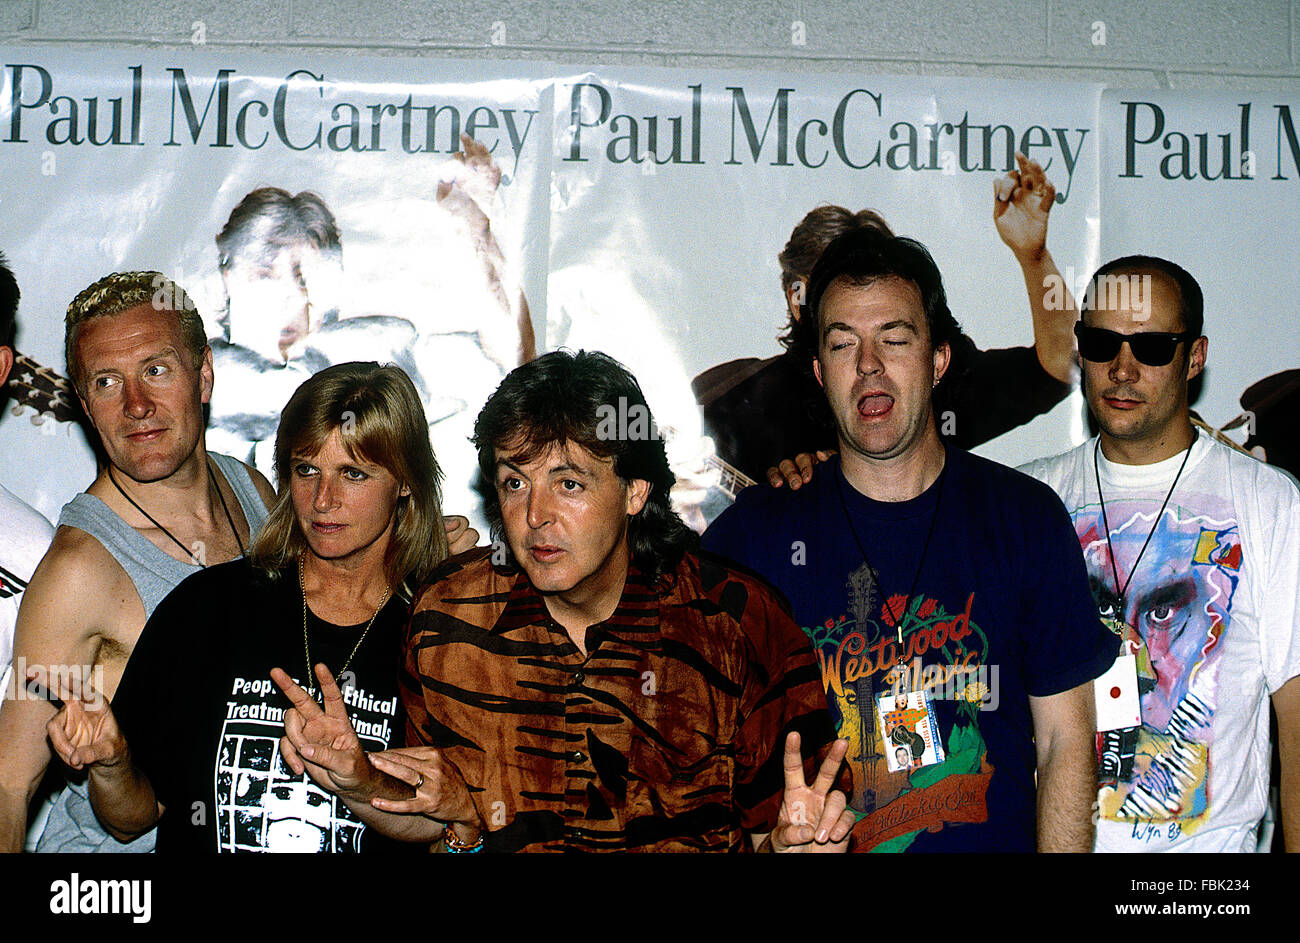 Washington, DC., USA 4th July, 1990 Paul McCartney and band at RFK stadium  prior to going on stage. With Paul is his wife Linda. Credit: Mark  Reinstein Stock Photo - Alamy